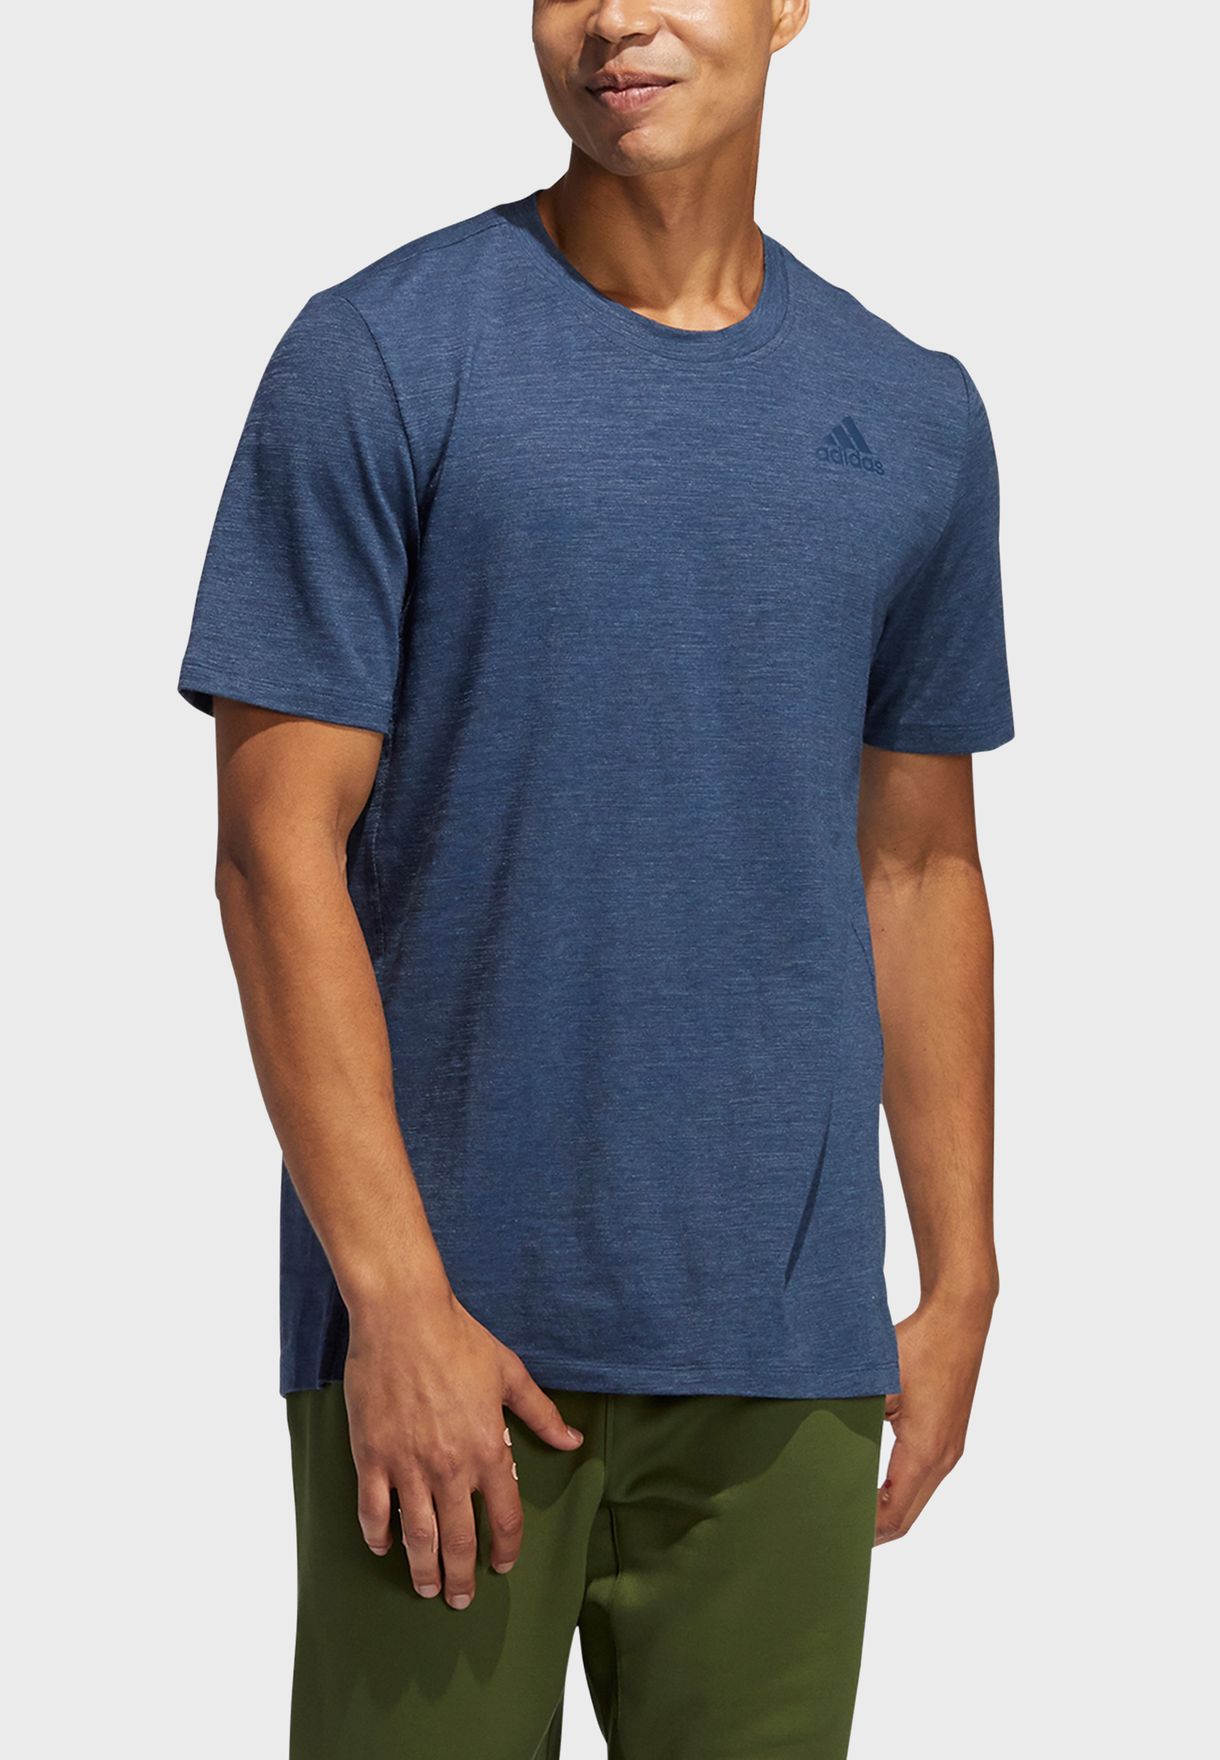 City Elevated T-Shirt